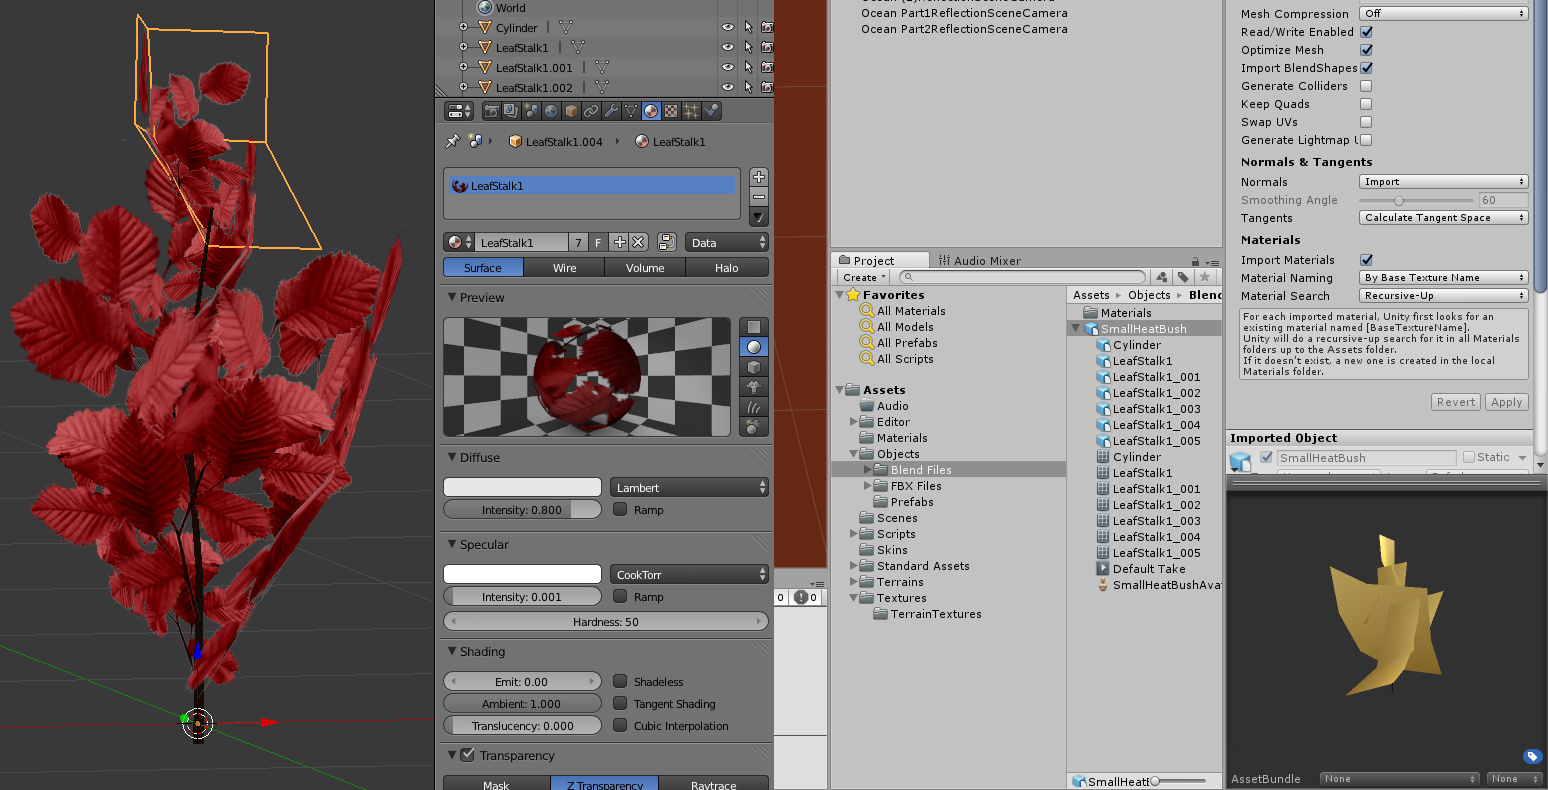 Export object. Материалы для Юнити. Material Unity. Create material Unity. Unity material Editor.